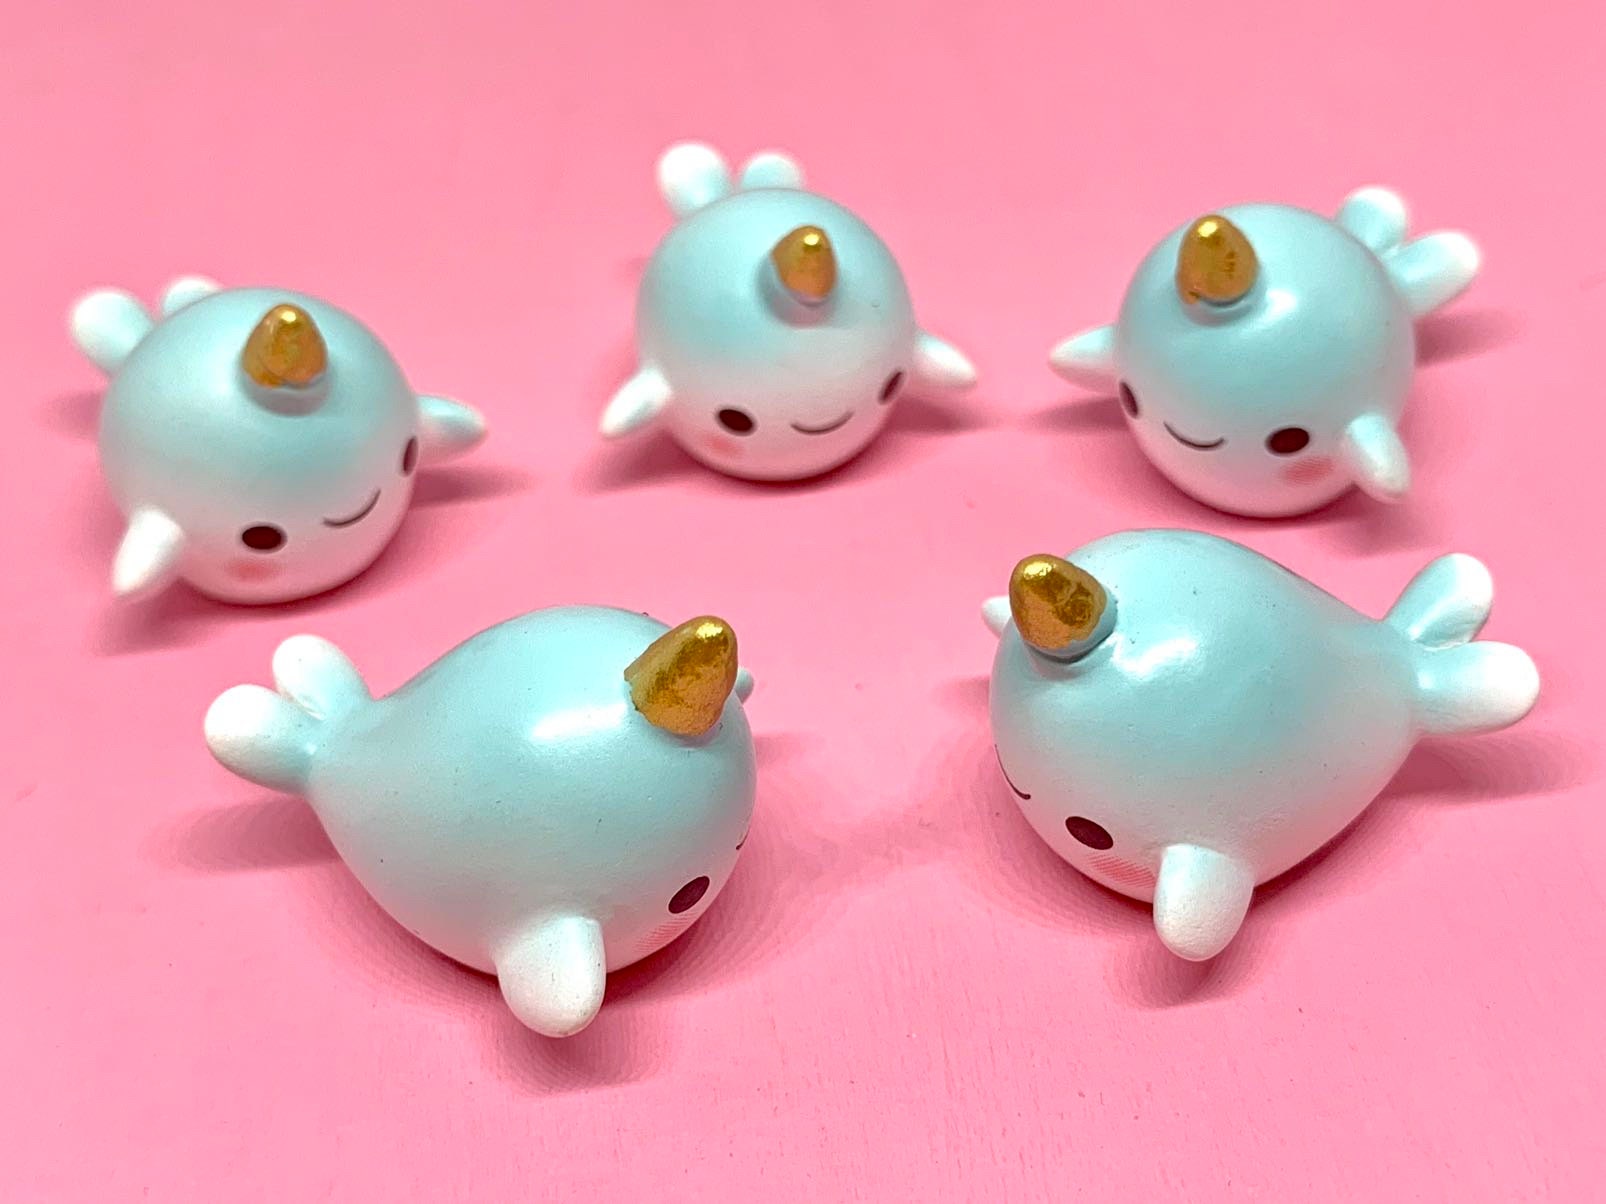 5pcs Pink Axolotl Miniatures Resin Cabochons for Slime or Decoden